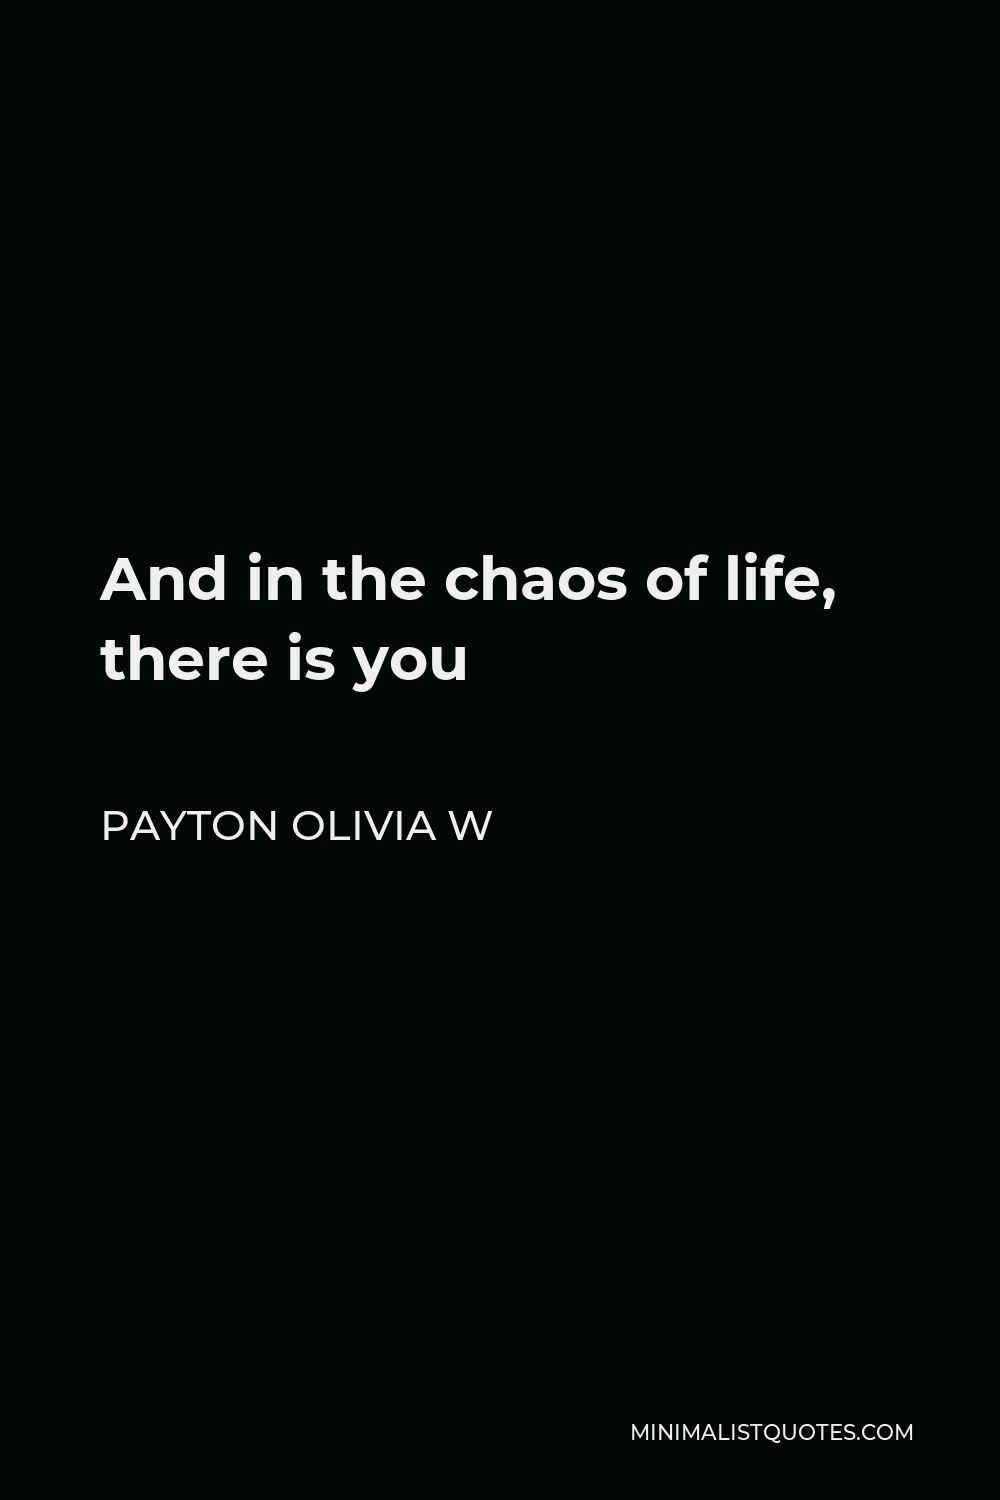 Payton Olivia W Quote - And in the chaos of life, there is you